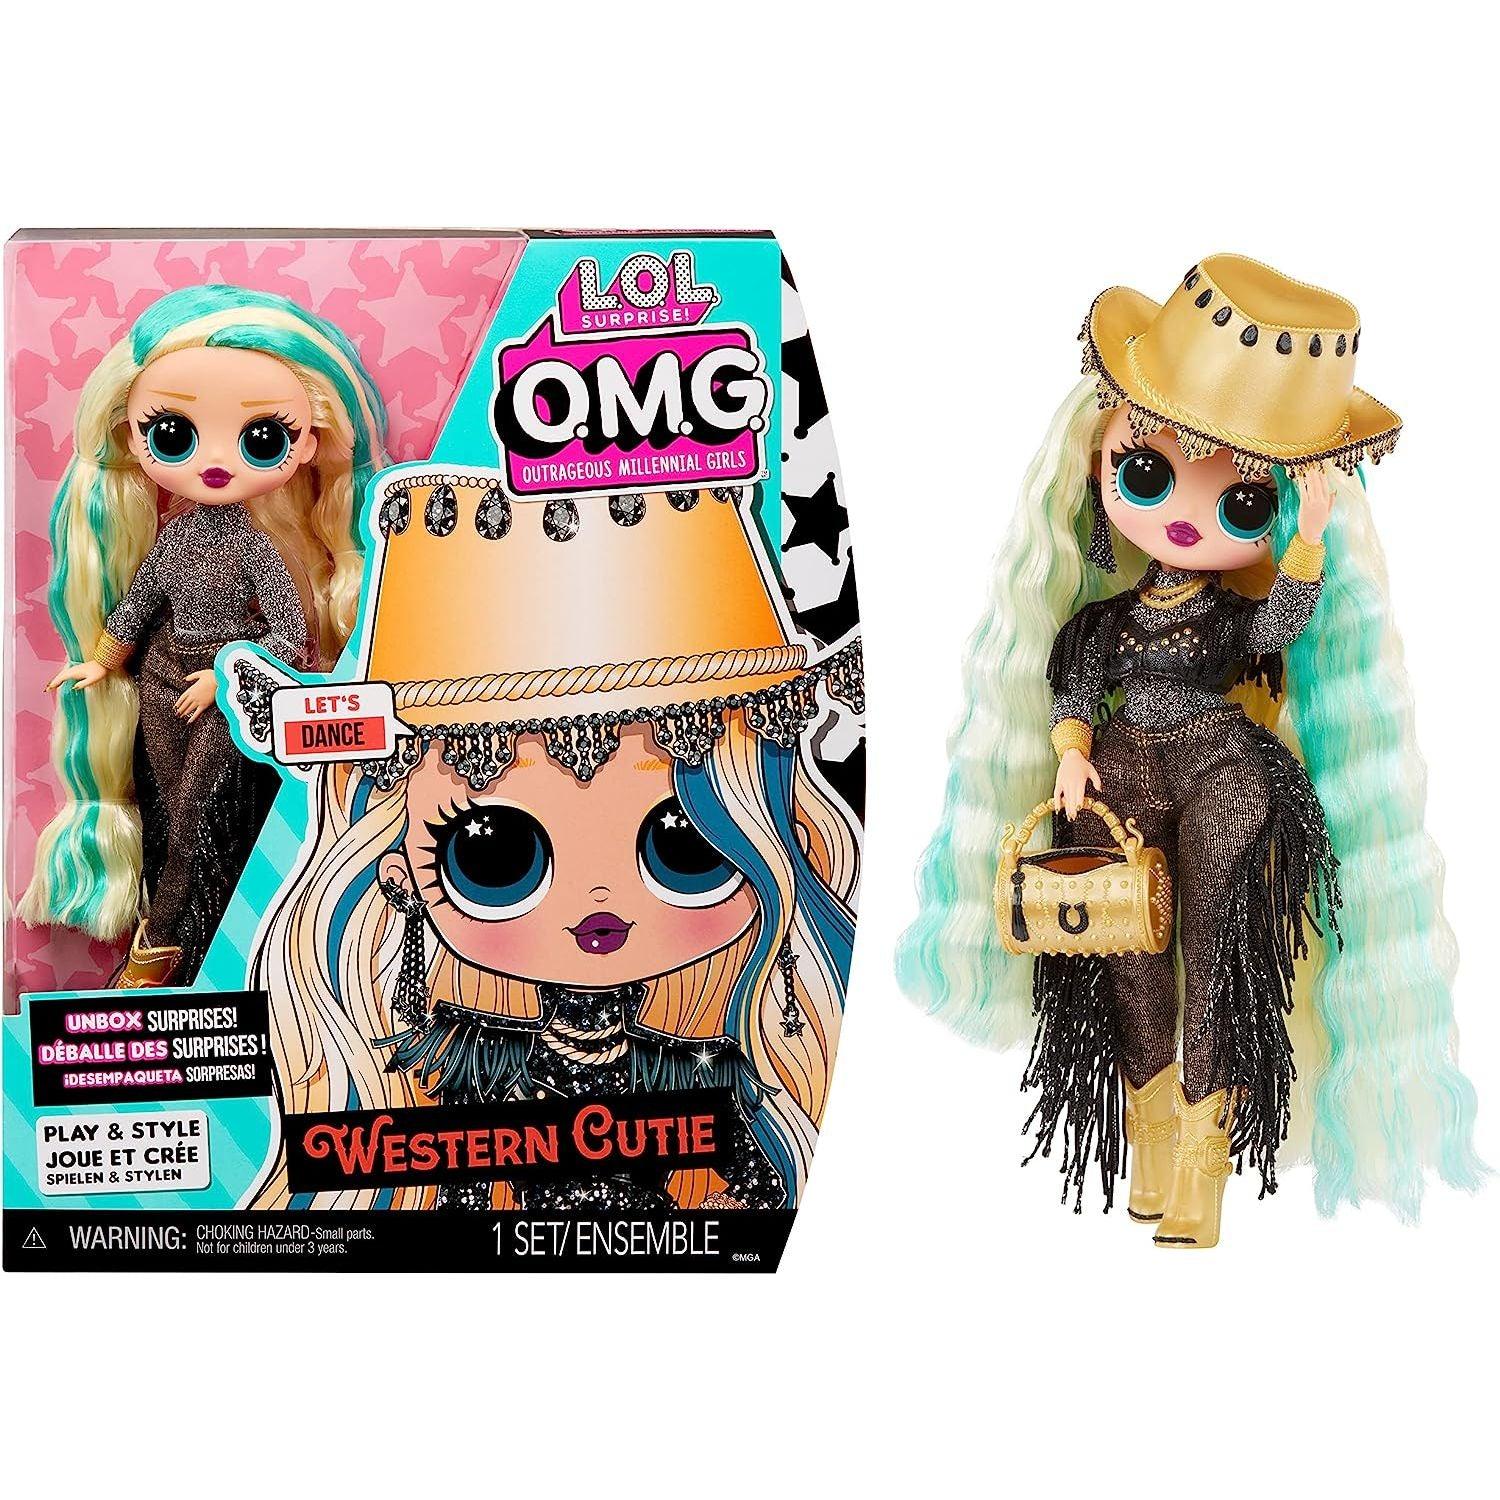 L.O.L. Surprise! O.M.G. Western Cutie Fashion Doll with Multiple Surprises and Fabulous Accessories - BumbleToys - 5-7 Years, Dolls, Fashion Dolls & Accessories, Girls, L.O.L, OXE, Pre-Order